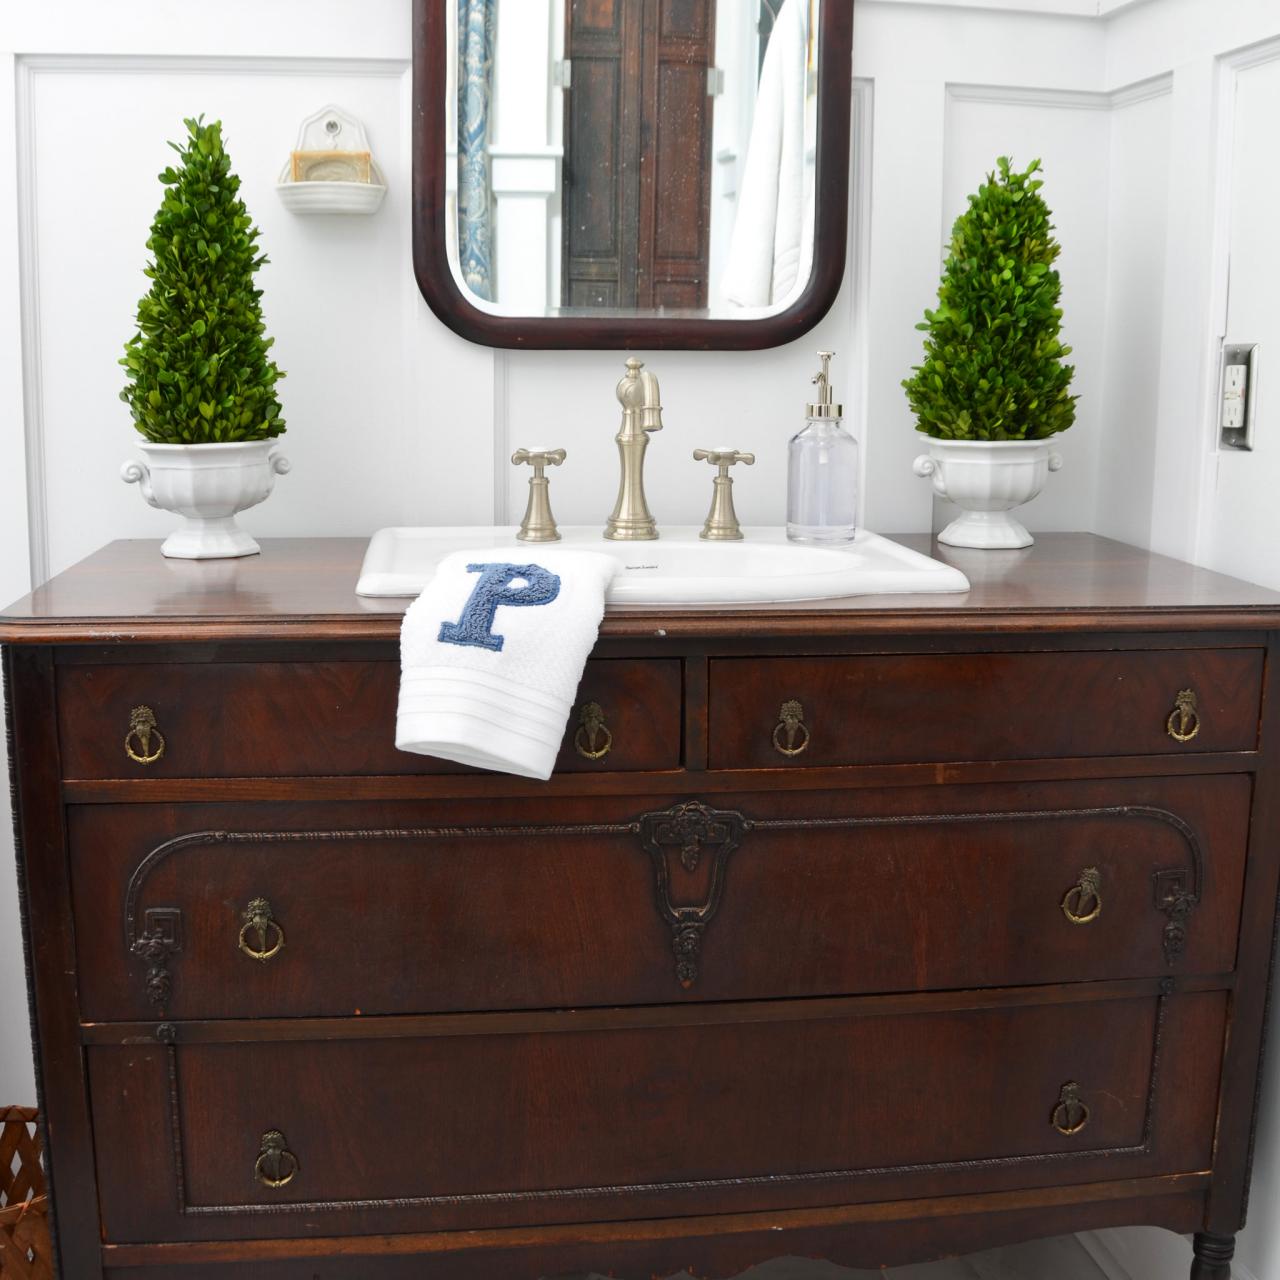 How to Update an Old Vanity with New Drawers Doors and Paint